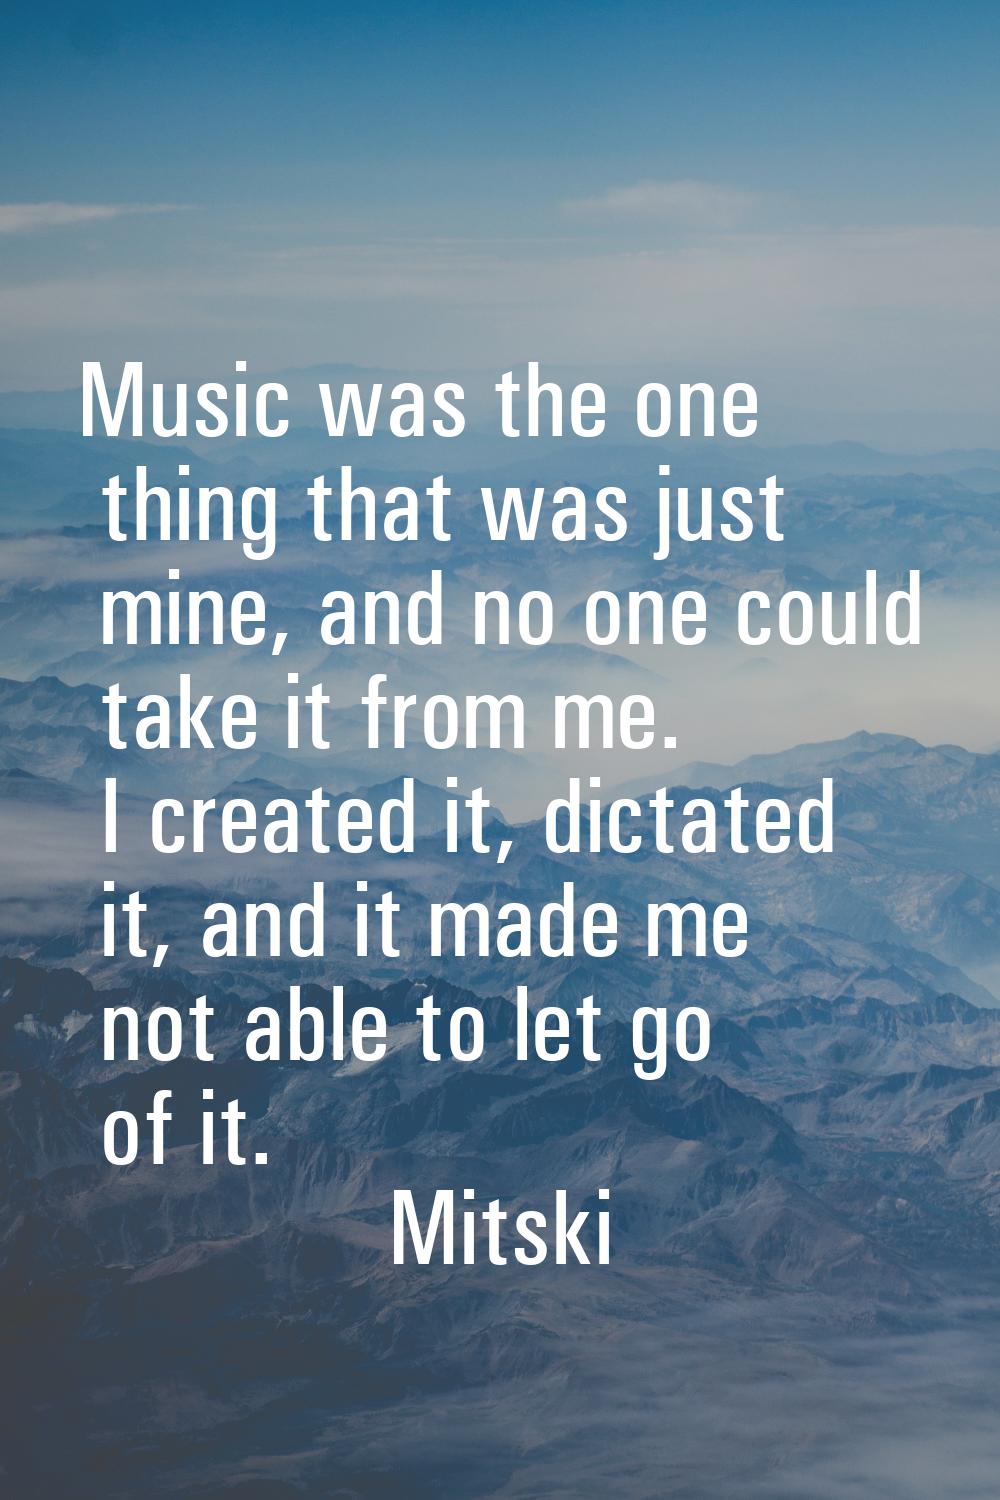 Music was the one thing that was just mine, and no one could take it from me. I created it, dictate